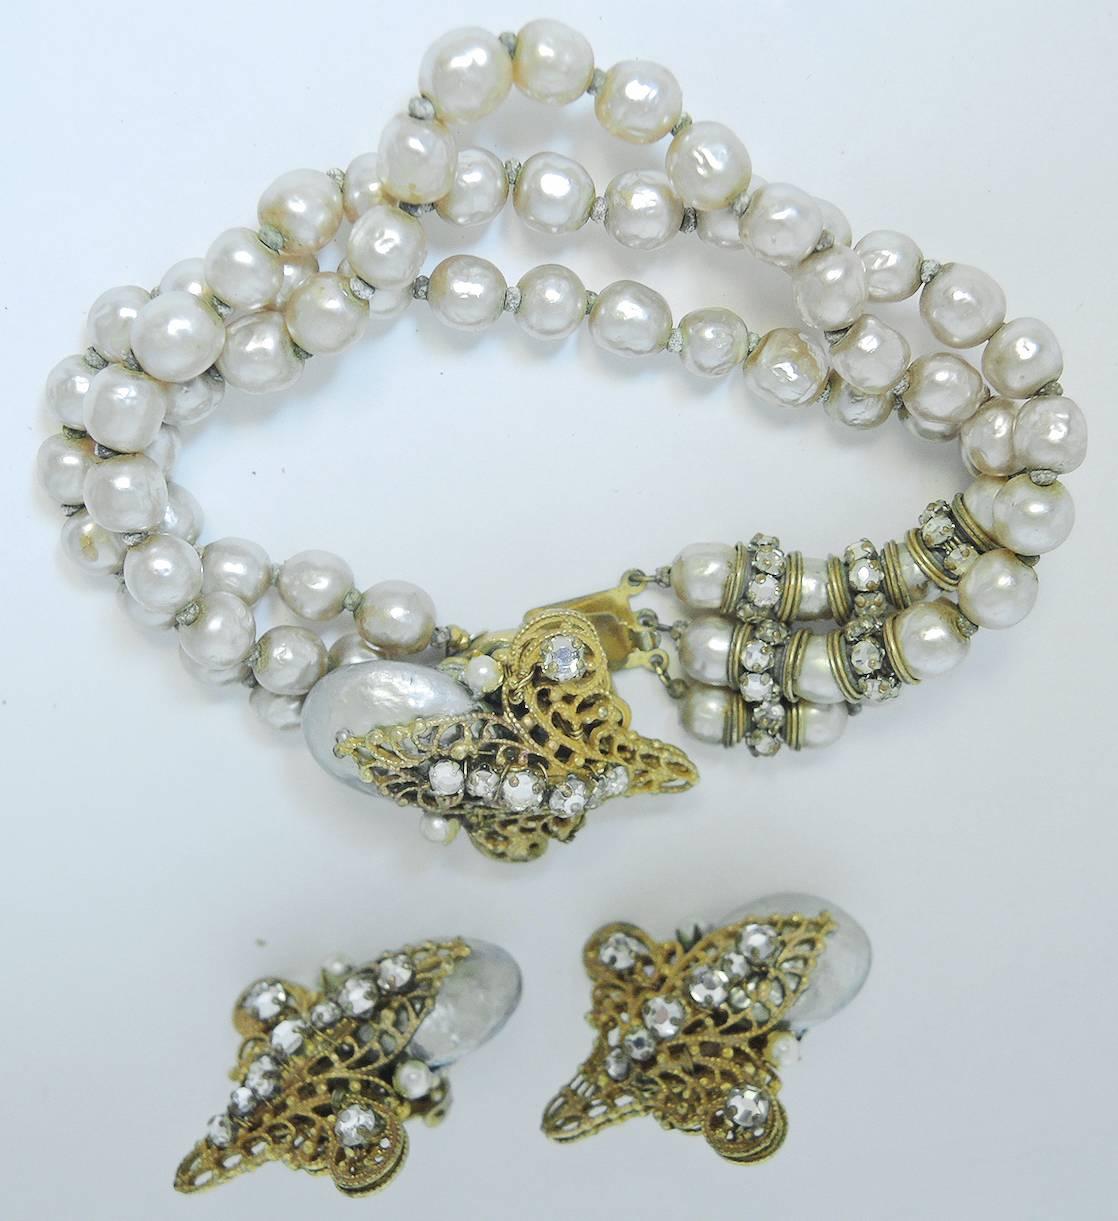 This bracelet has 3 strands of faux pearls. It has rondell spacers in the front on one side. The centerpiece has a large baroque pearl with rose montee stones.  It is in a gold tone open work setting. The bracelet measures 7-1/2” x 3/8”. The